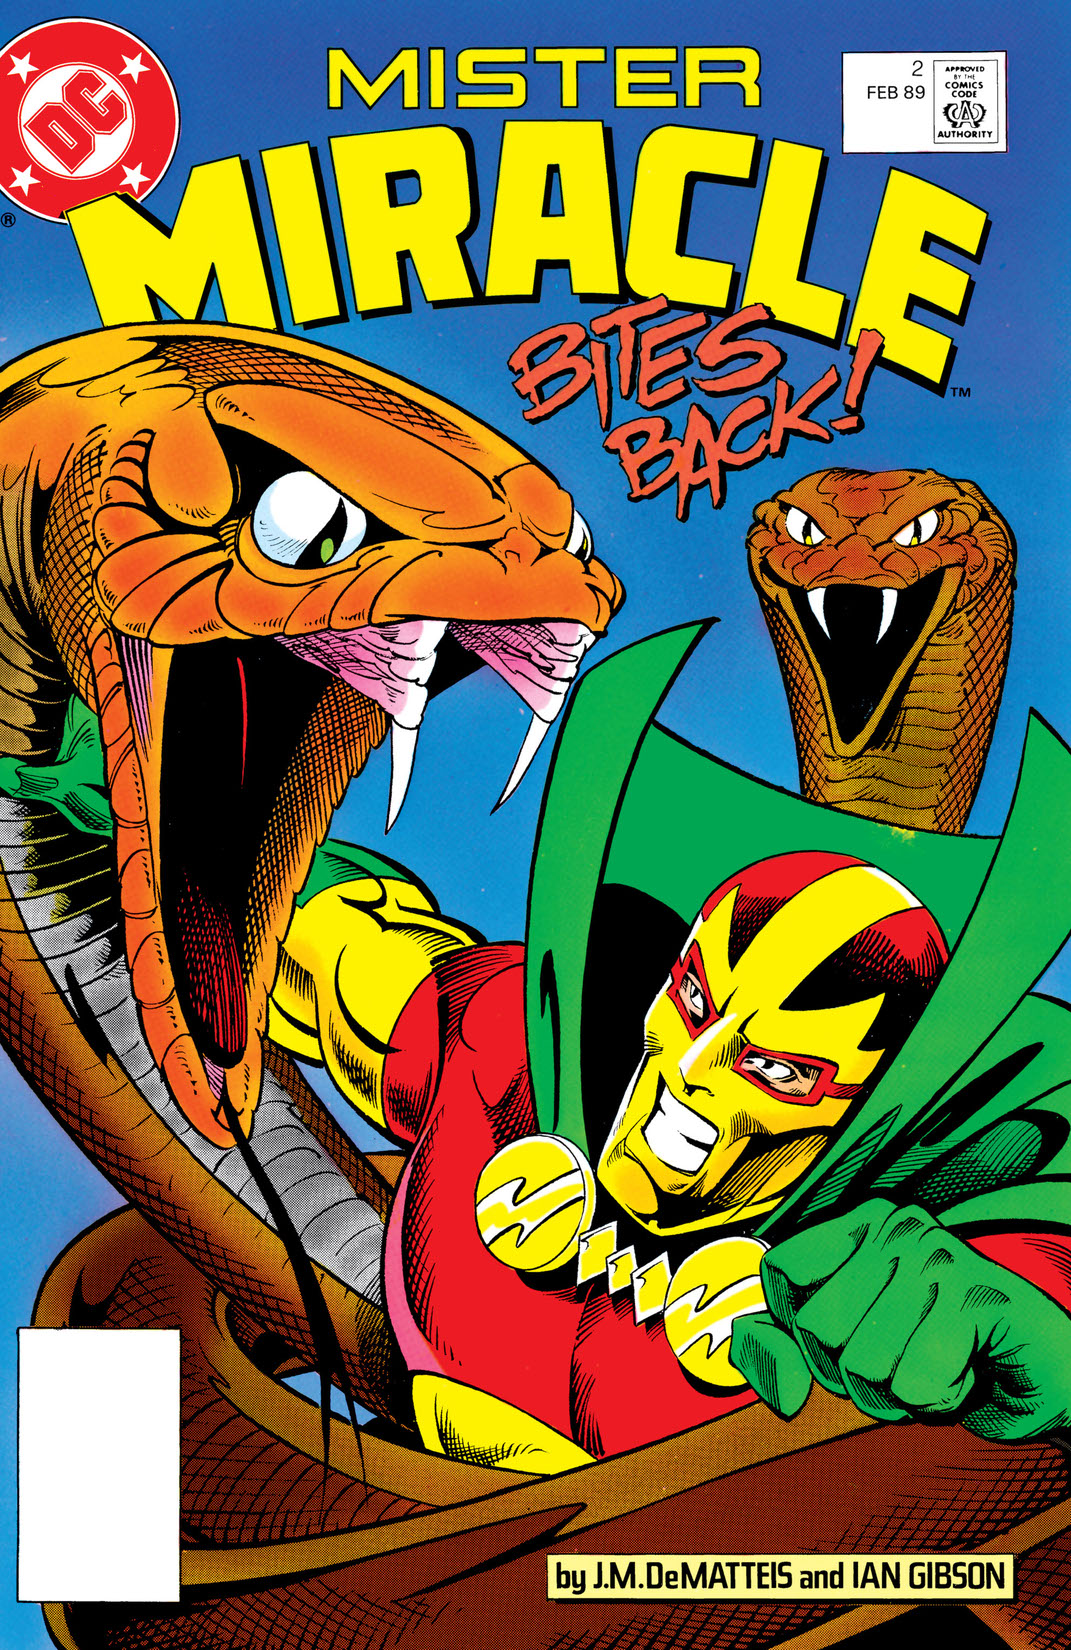 Mister Miracle (1988-) #2 preview images